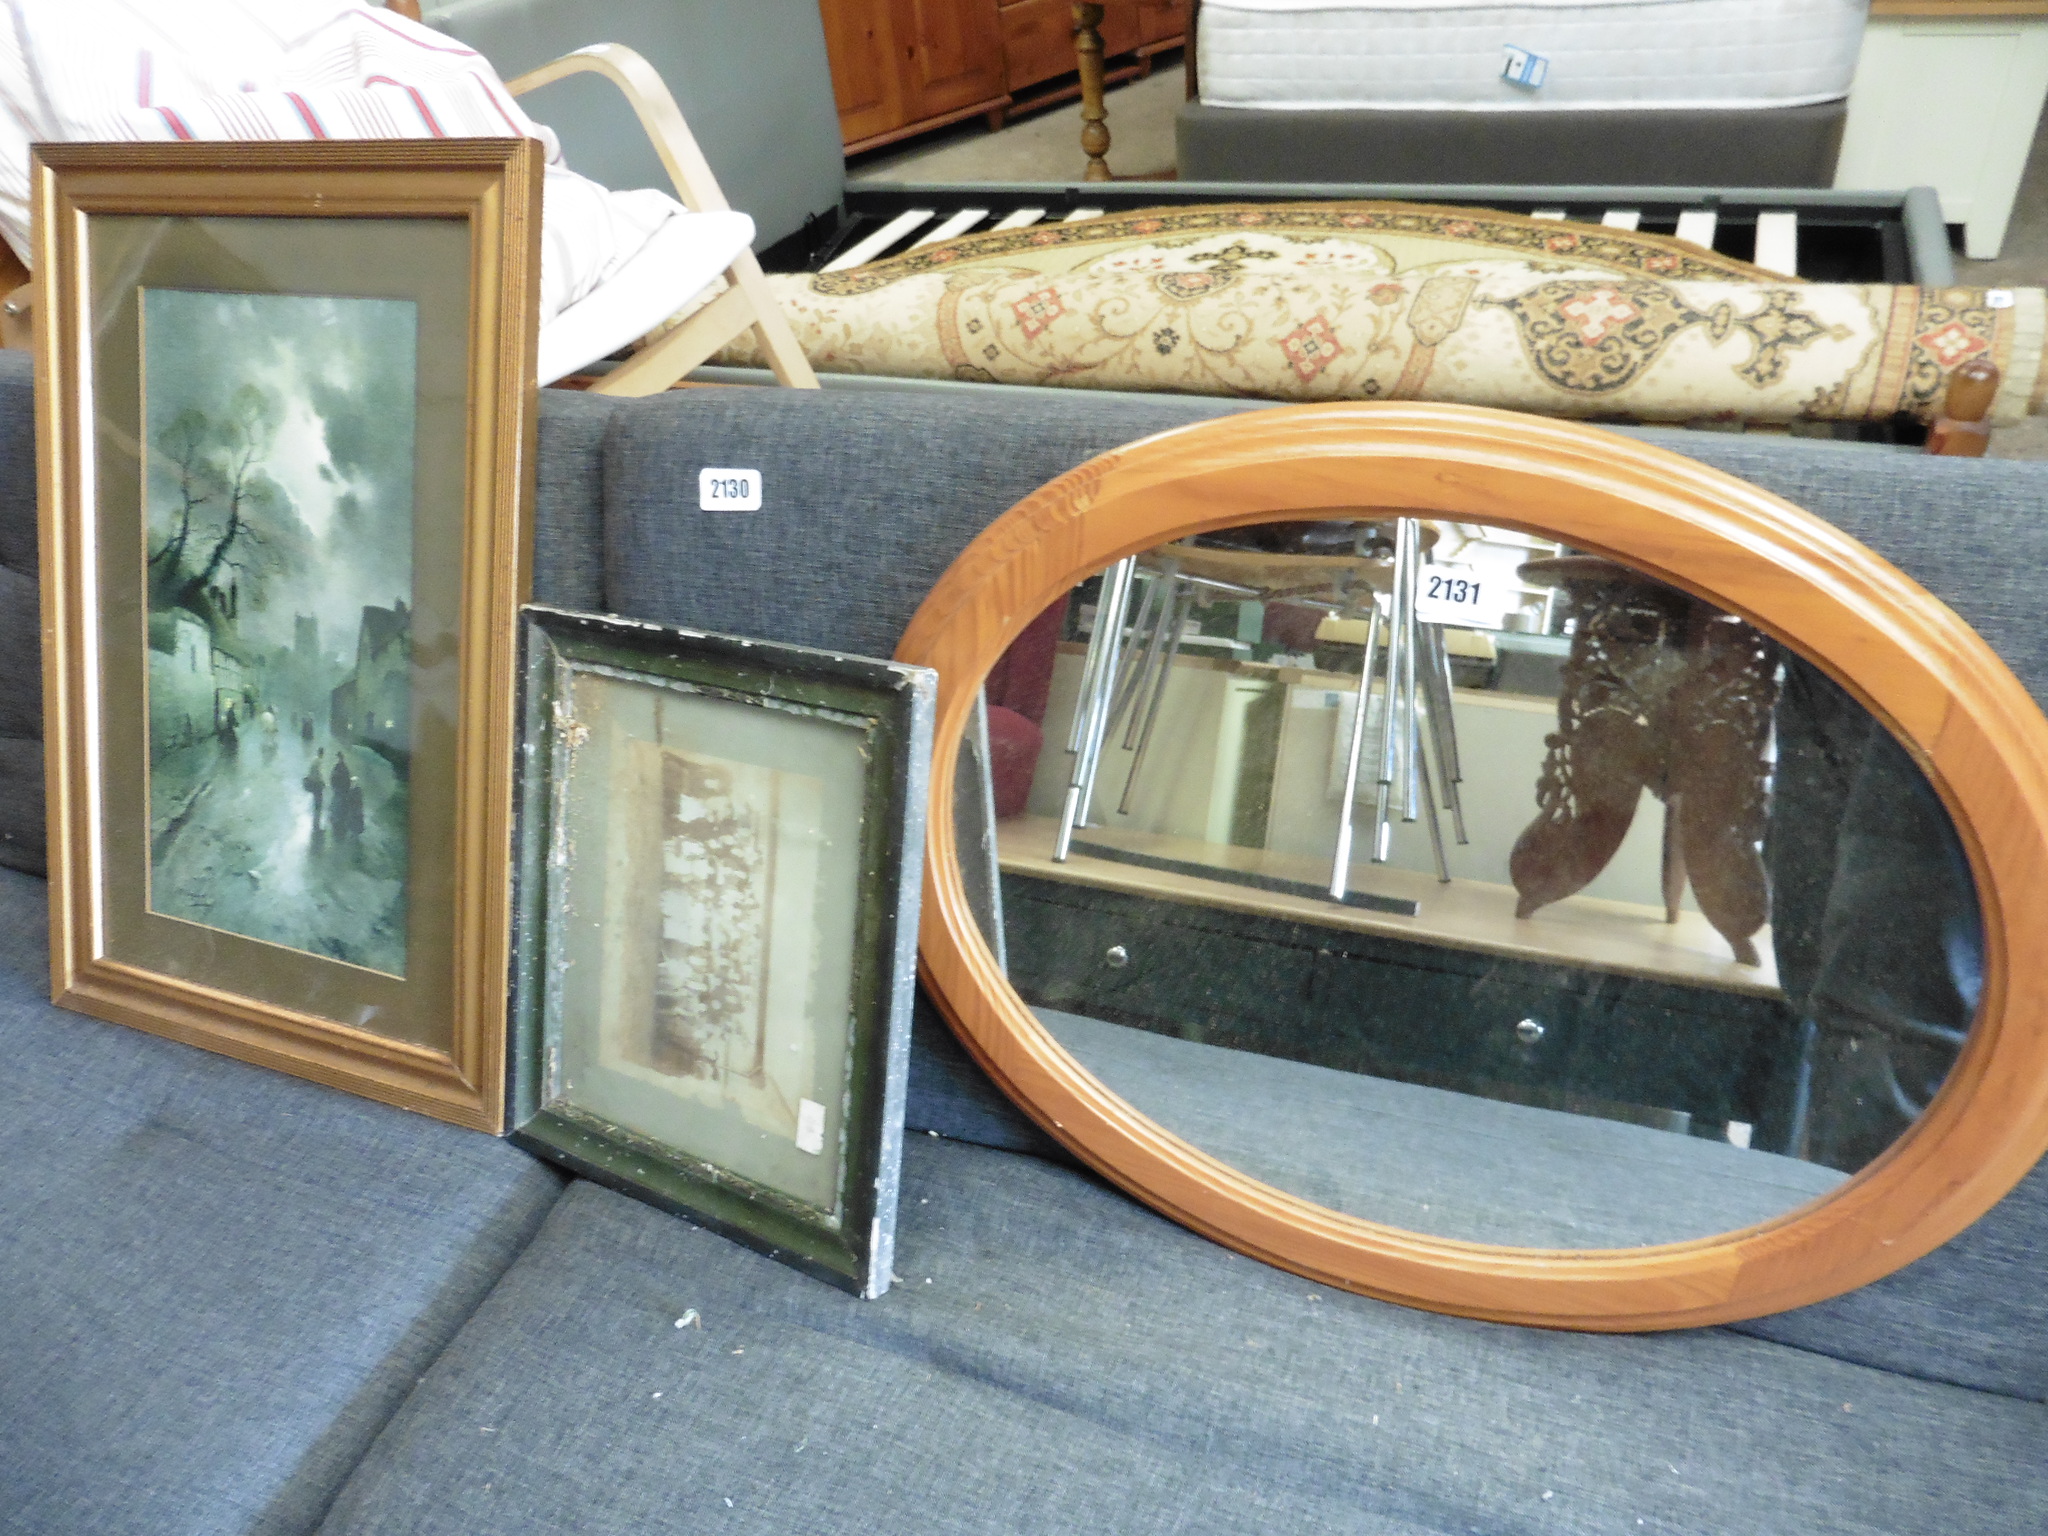 (2164) Oval framed mirror and 2 pictures